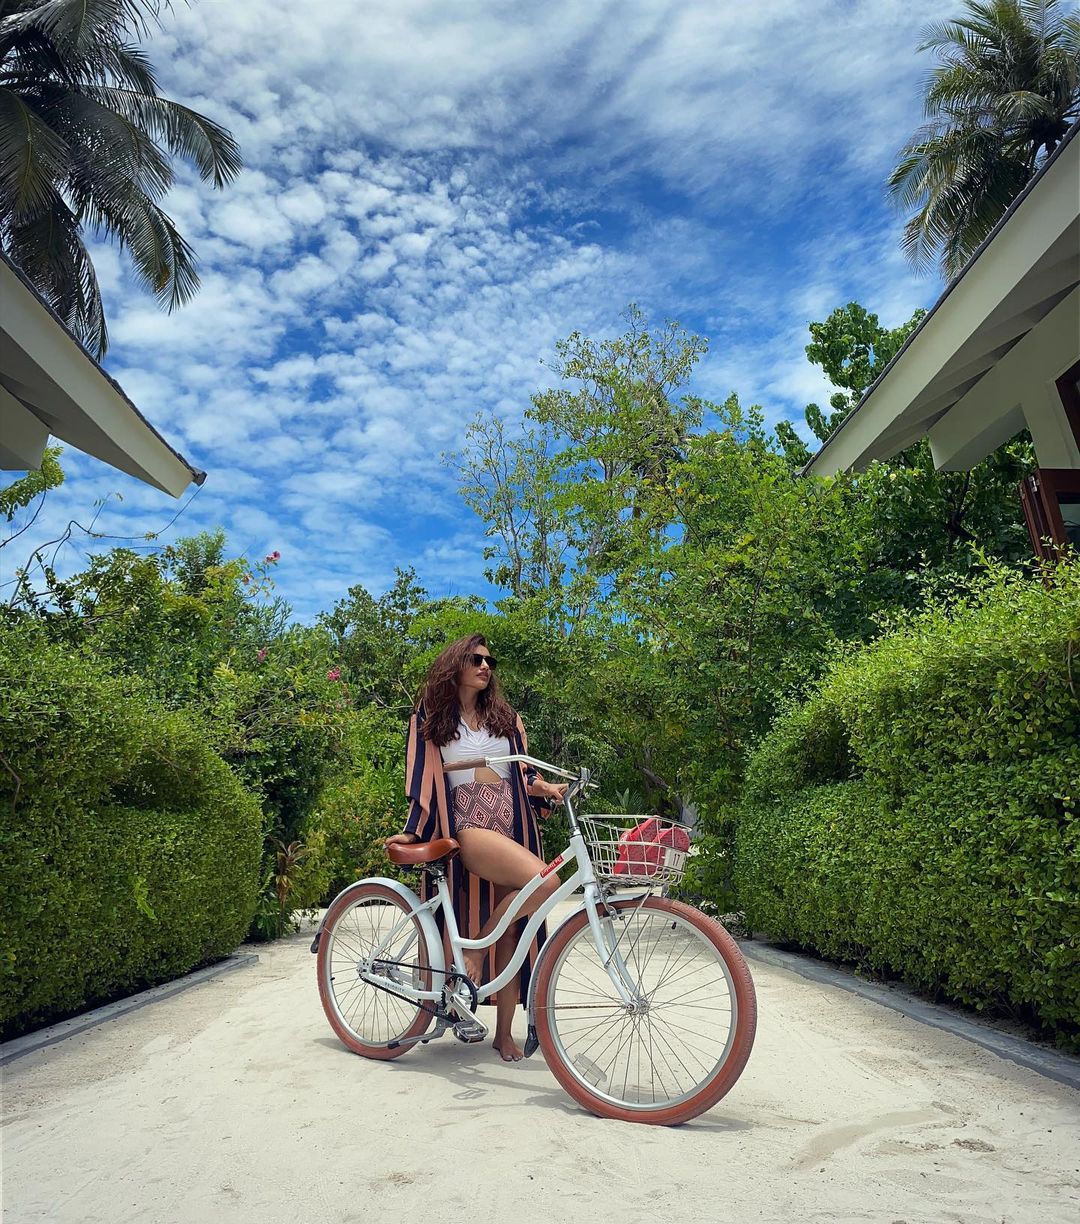  Surbhi shared photos of how she is spending her time in Madives. Posting a photo with a bicycle, she said, 